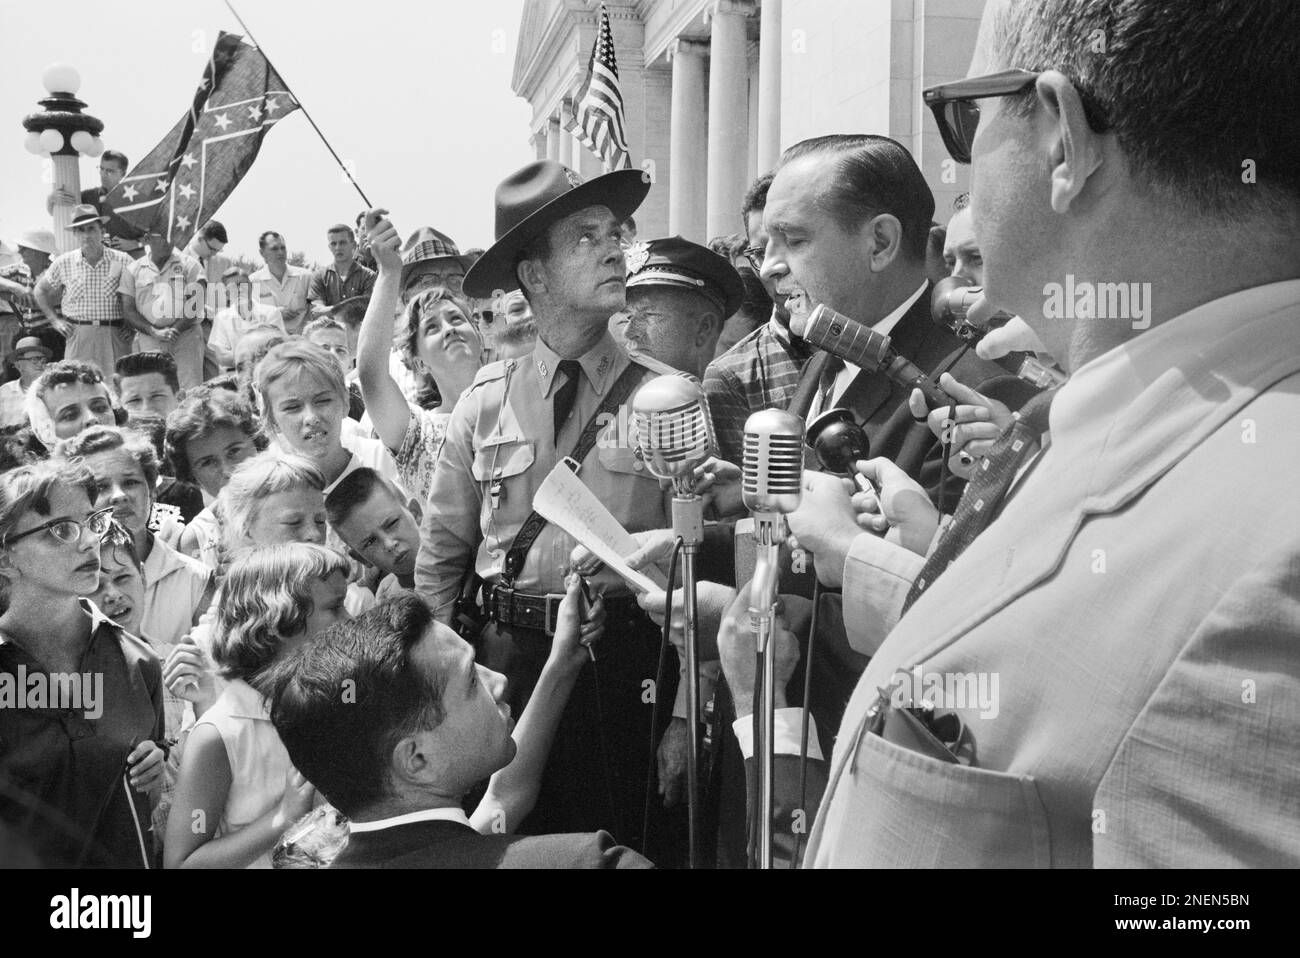 Arkansas Governor Orval Faubus speaking to Crowd, one holding Confederate flag, gathered at Arkansas State Capitol to protest Integration of Central High School, Little Rock, Arkansas, USA, John T. Bledsoe, U.S. News & World Report Magazine Photograph Collection, August 20, 1959 Stock Photo